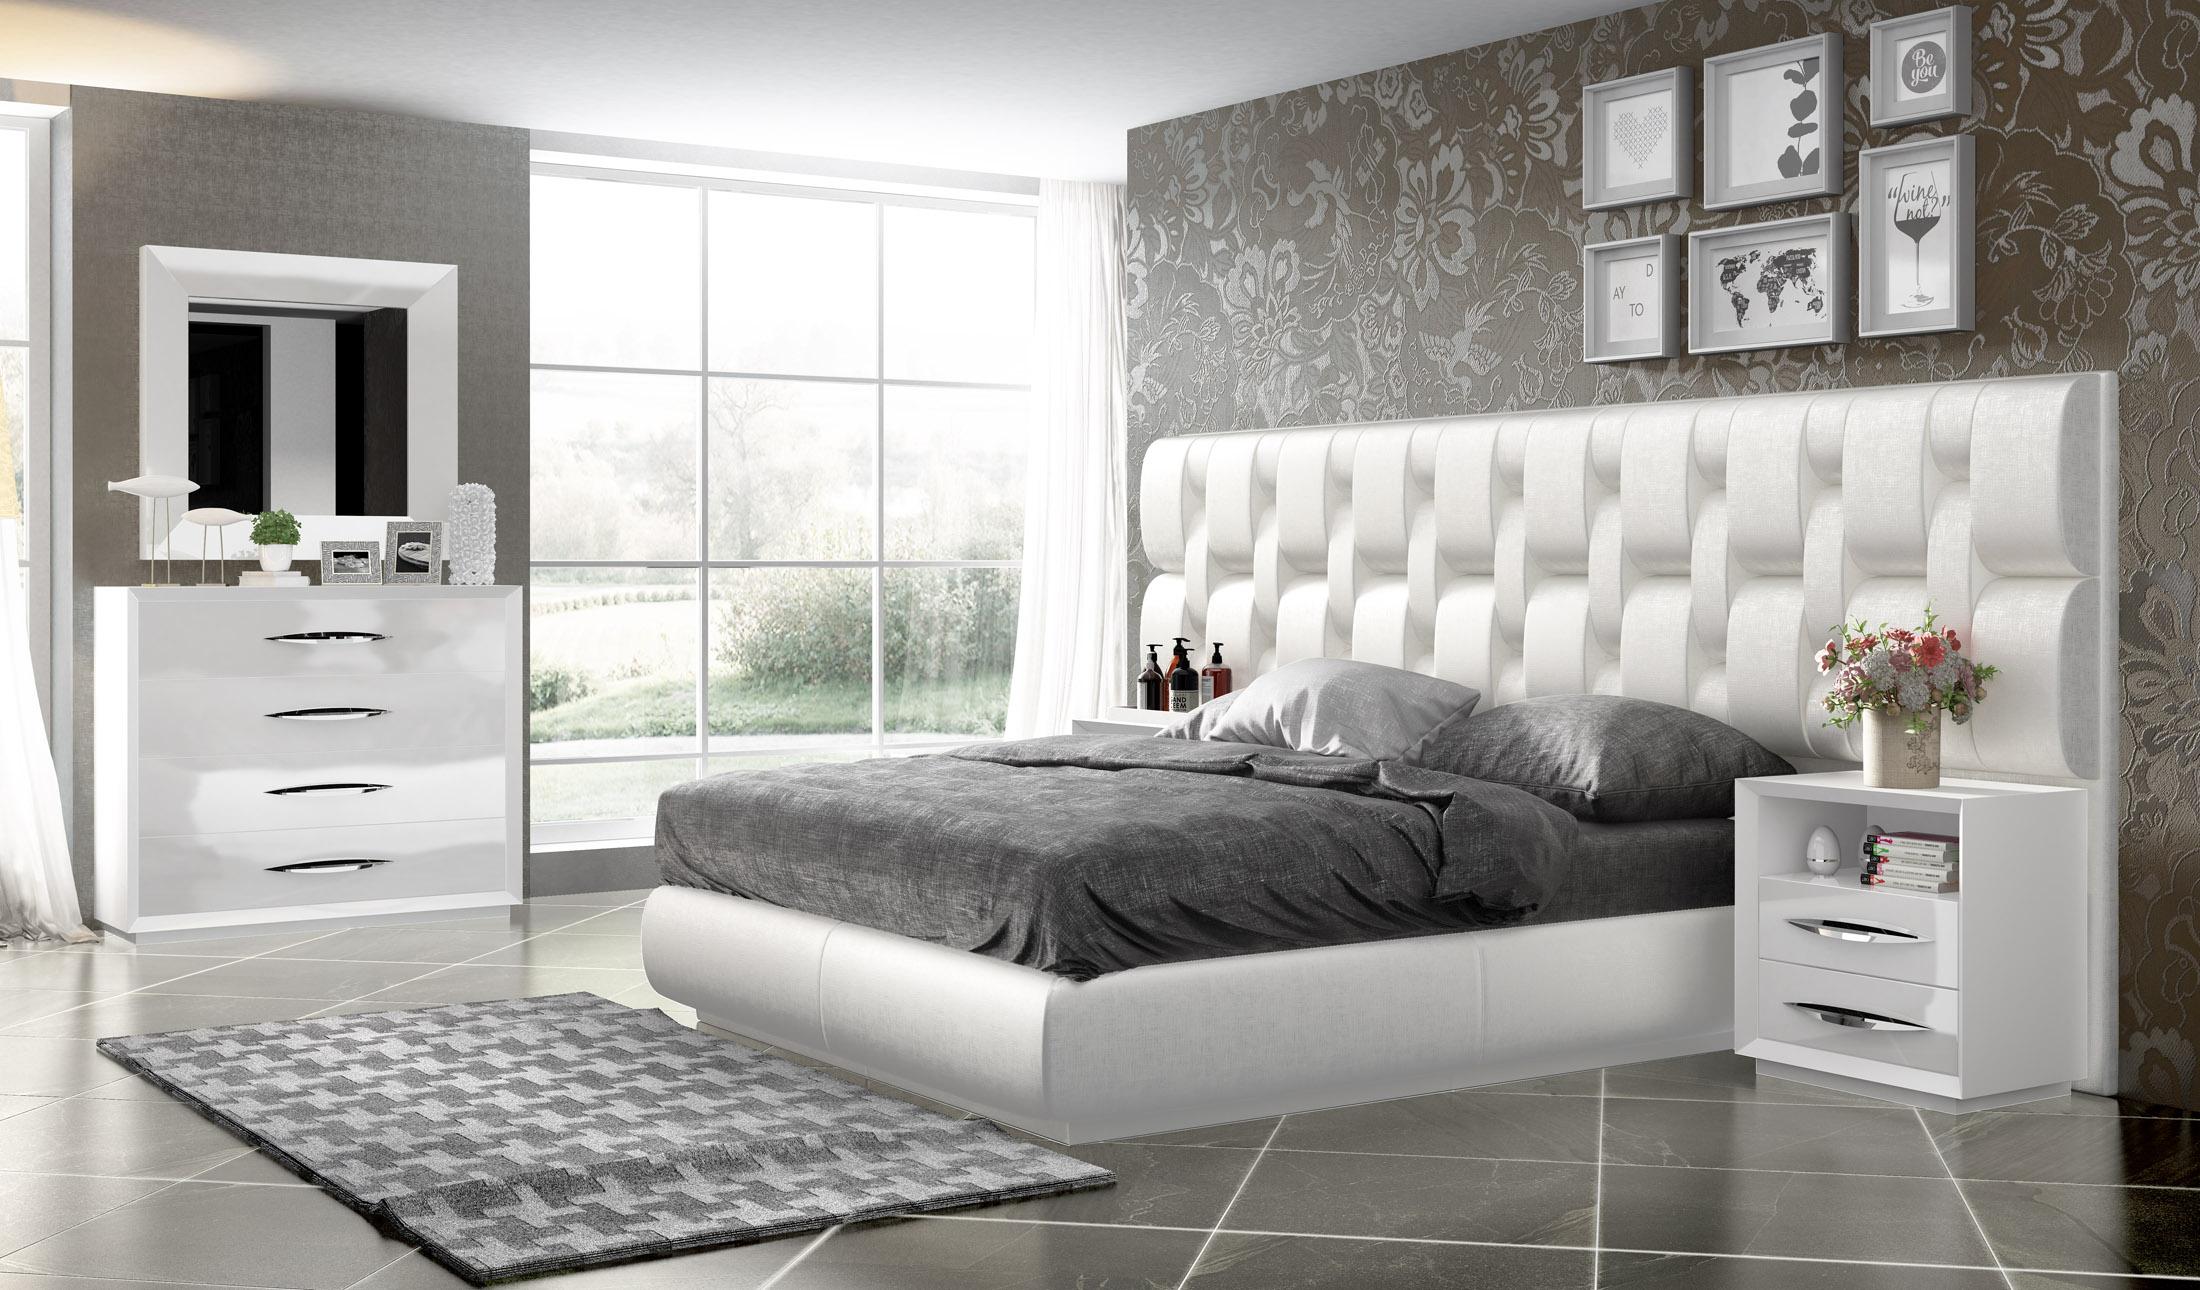 

    
Glam Glossy White Queen Bedroom Set 3Pcs MADE IN SPAIN Contemporary ESF Emporio
